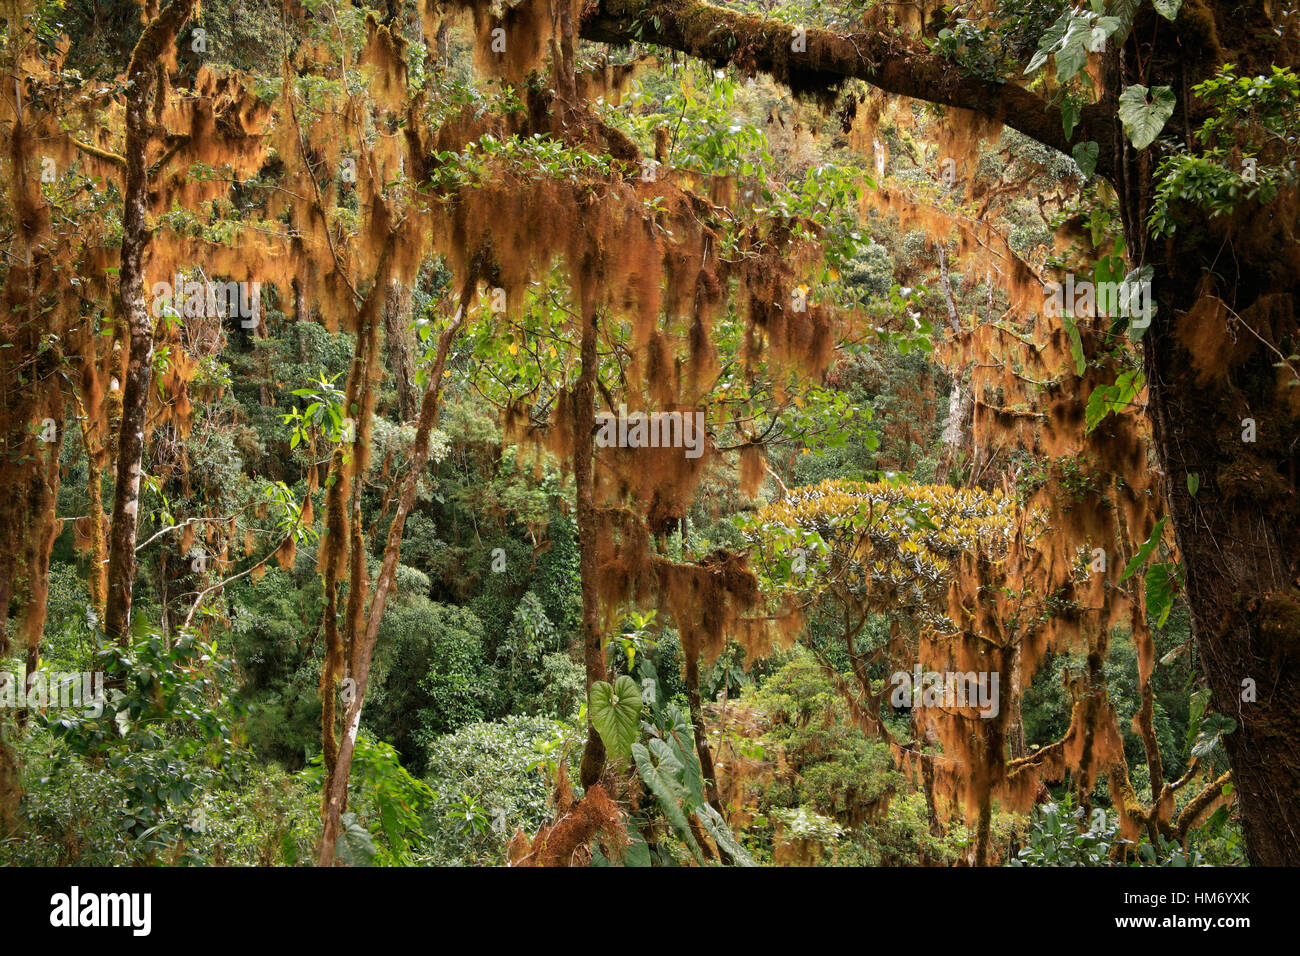 Orange liverworts on cloud forest branches. Chirripo National Park, Costa Rica. Stock Photo